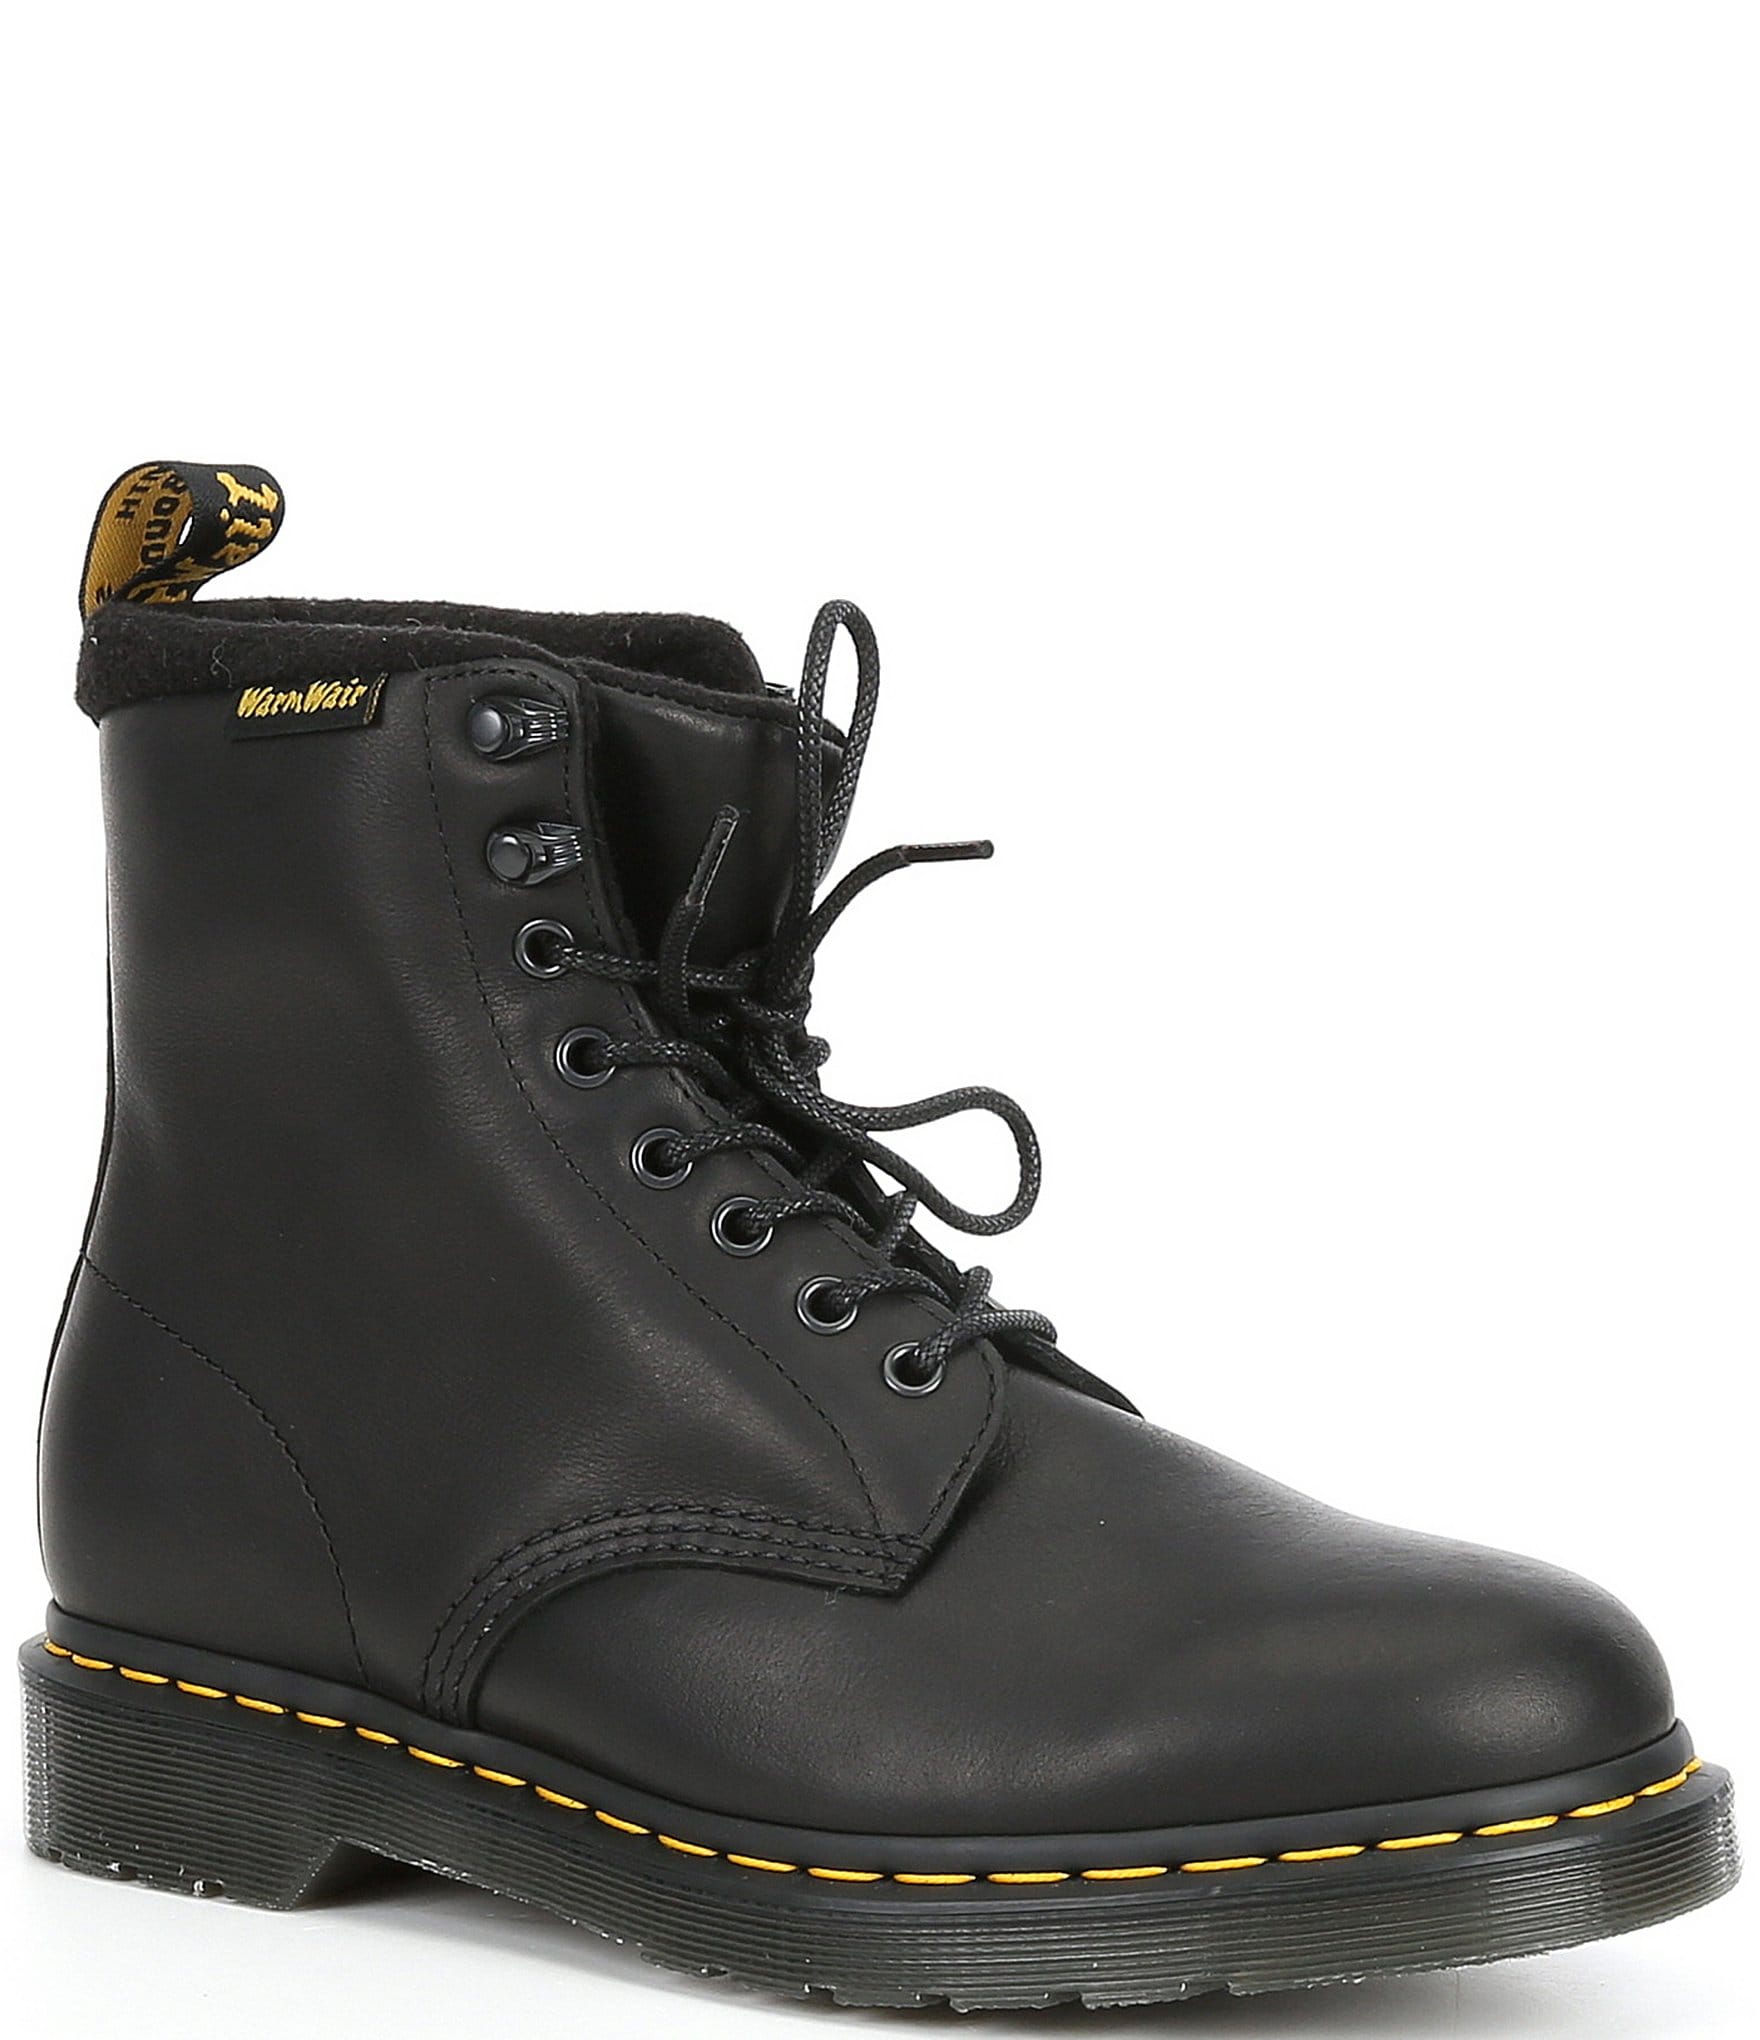 second hand weather Unevenness Dr. Martens Men's 1460 Pascal Waterproof Leather Lace-Up Boots | Dillard's